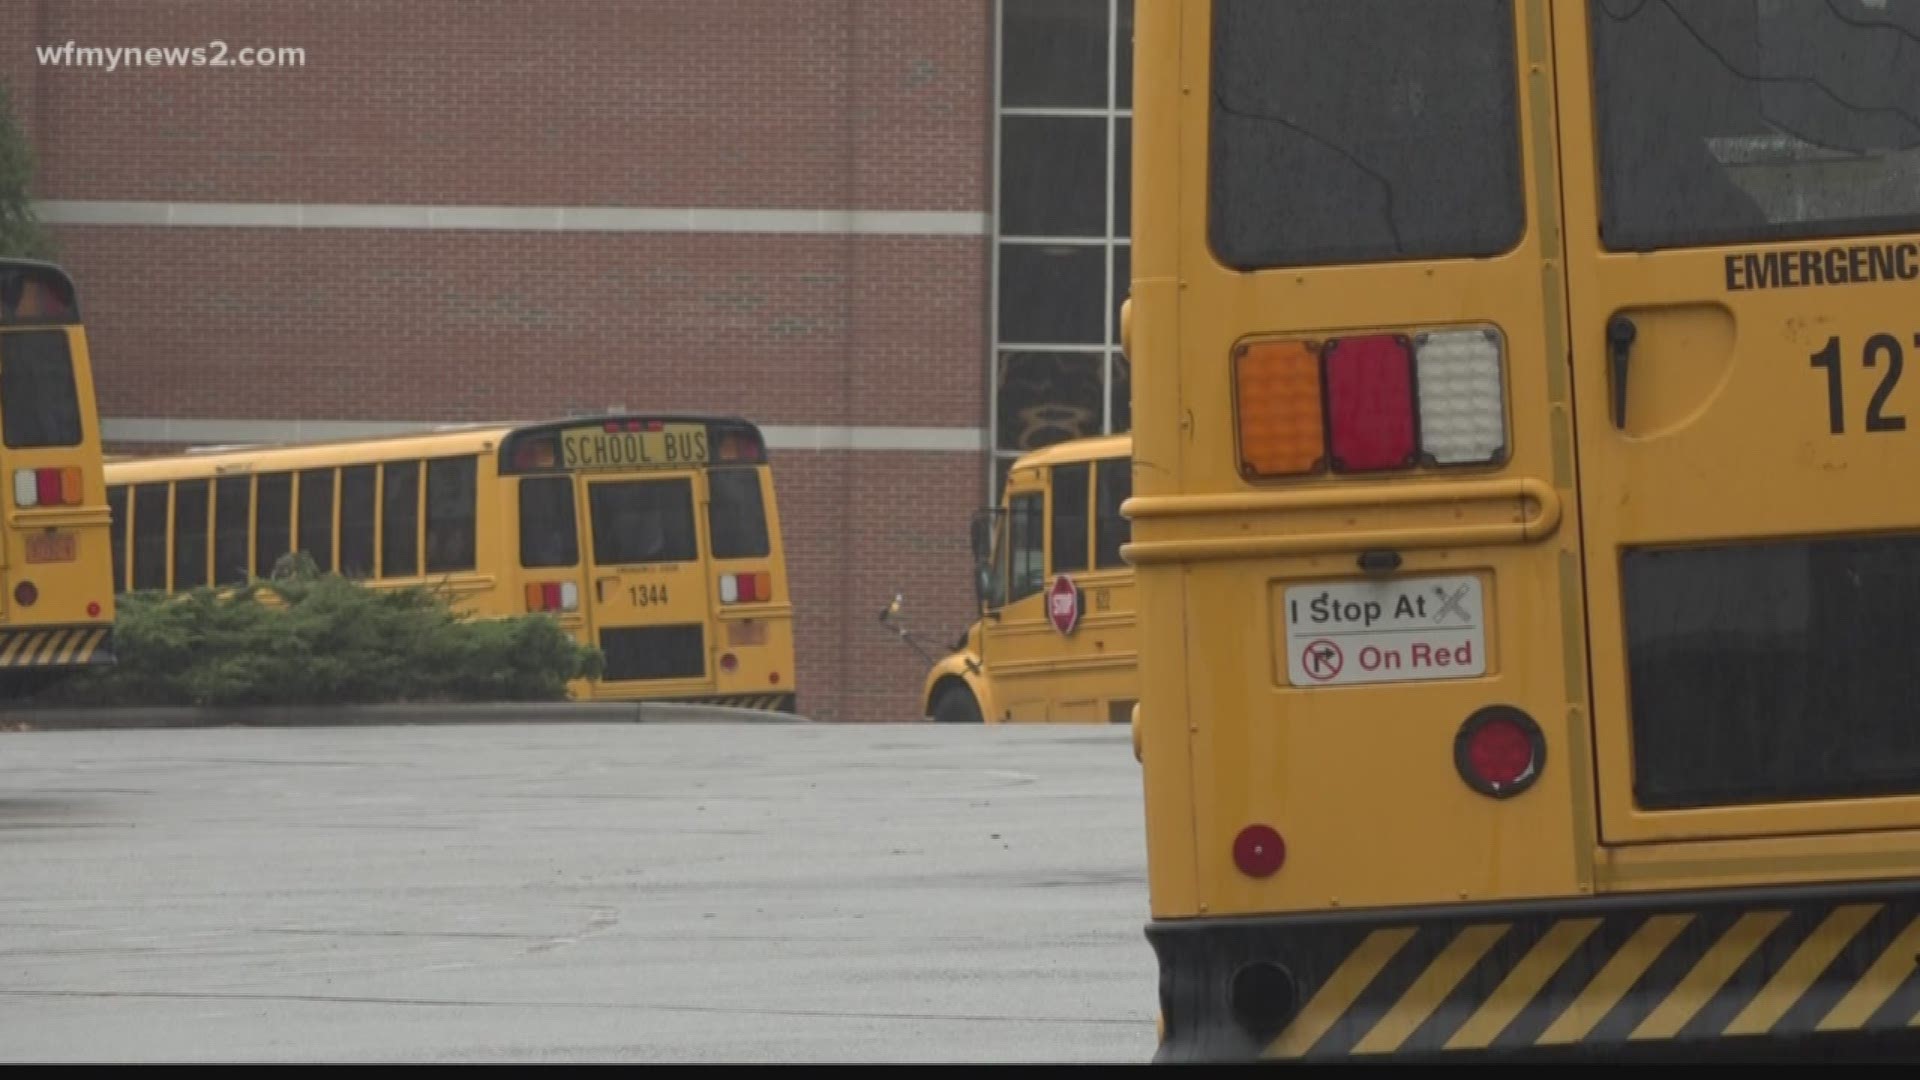 School Bus X Video - School bus drivers planning walkout in Guilford County | wfmynews2.com